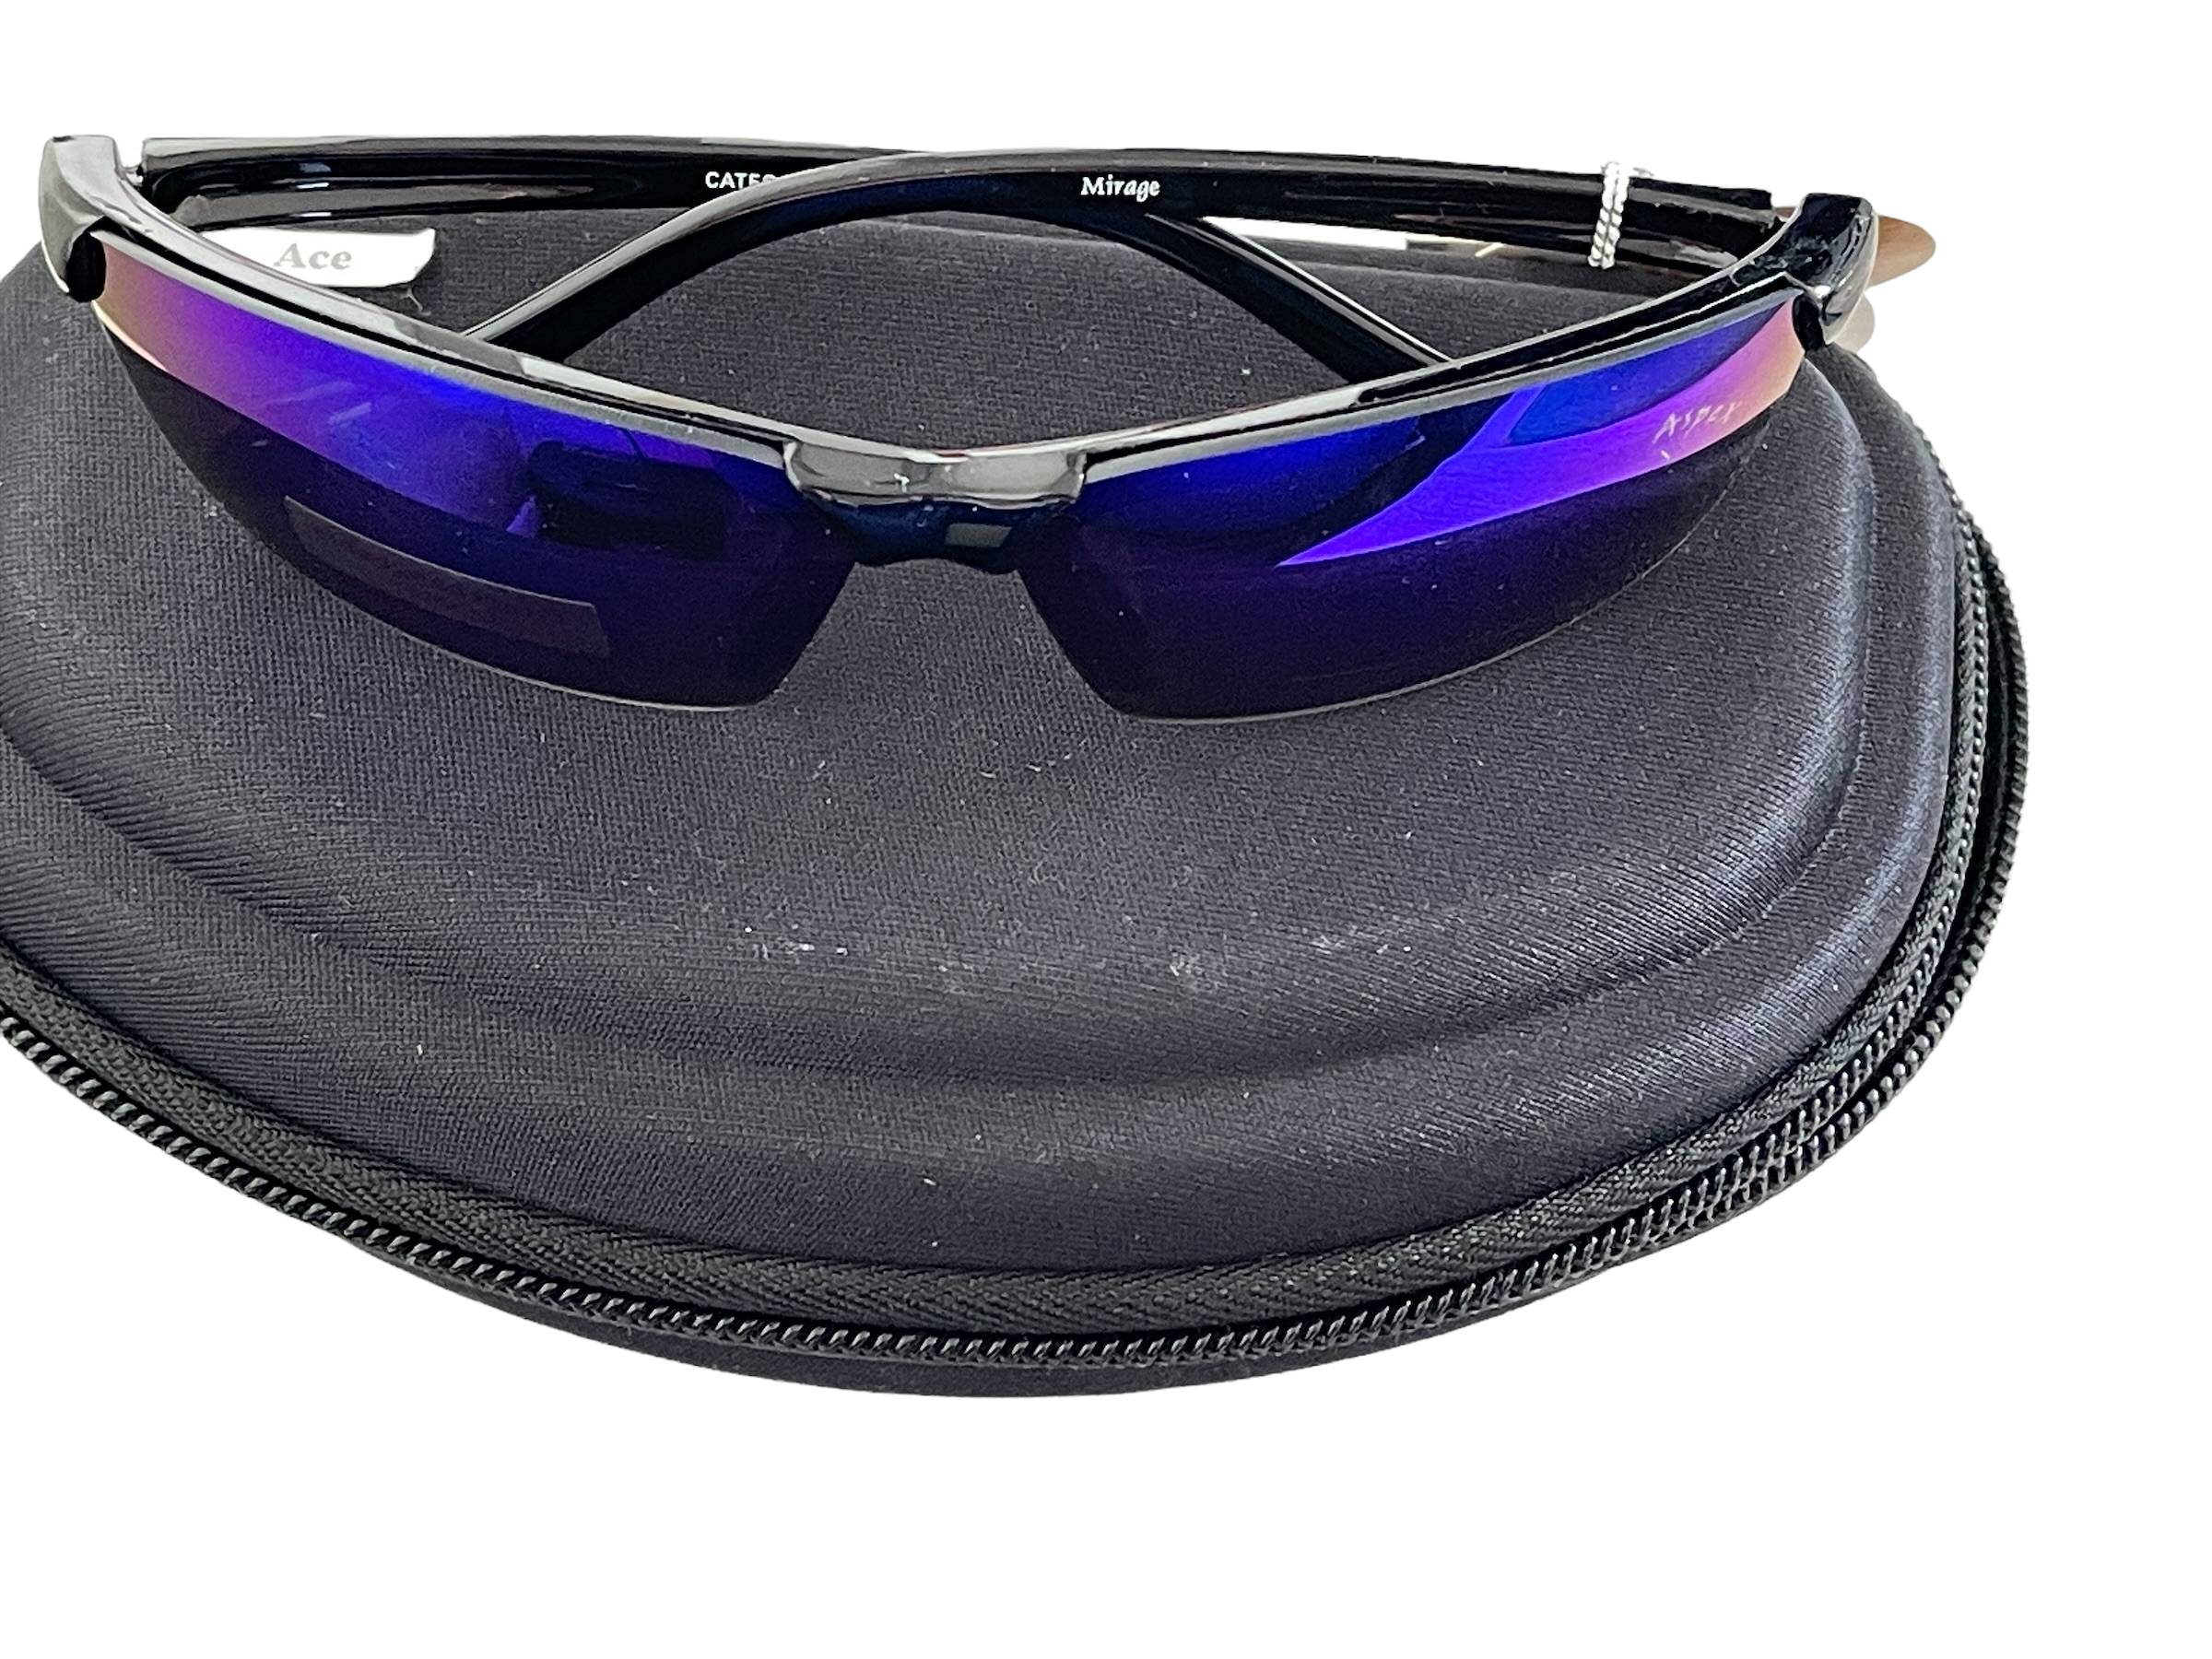 Aspex Sunglasses with Case Cloth Lenses Surplus Stock from Our private jet charter. - Image 5 of 5